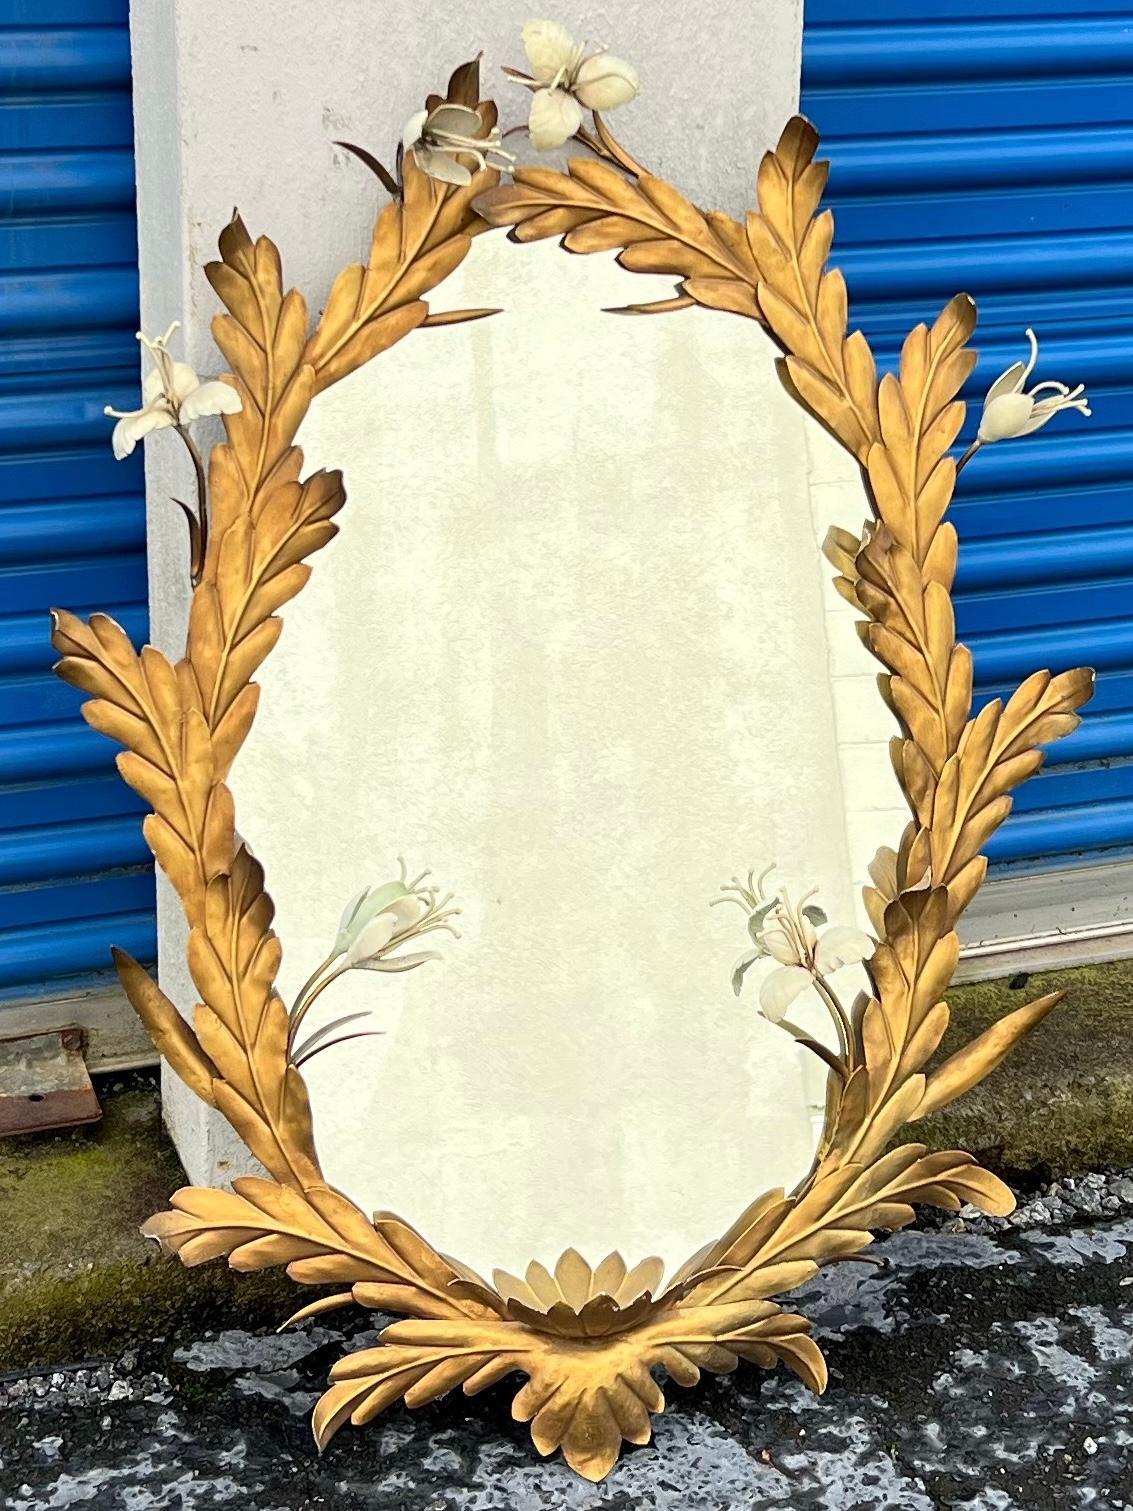 20th Century Hollywood Regency Italian Gilt Metal and Floral Tole Toleware Oval Wall Mirror